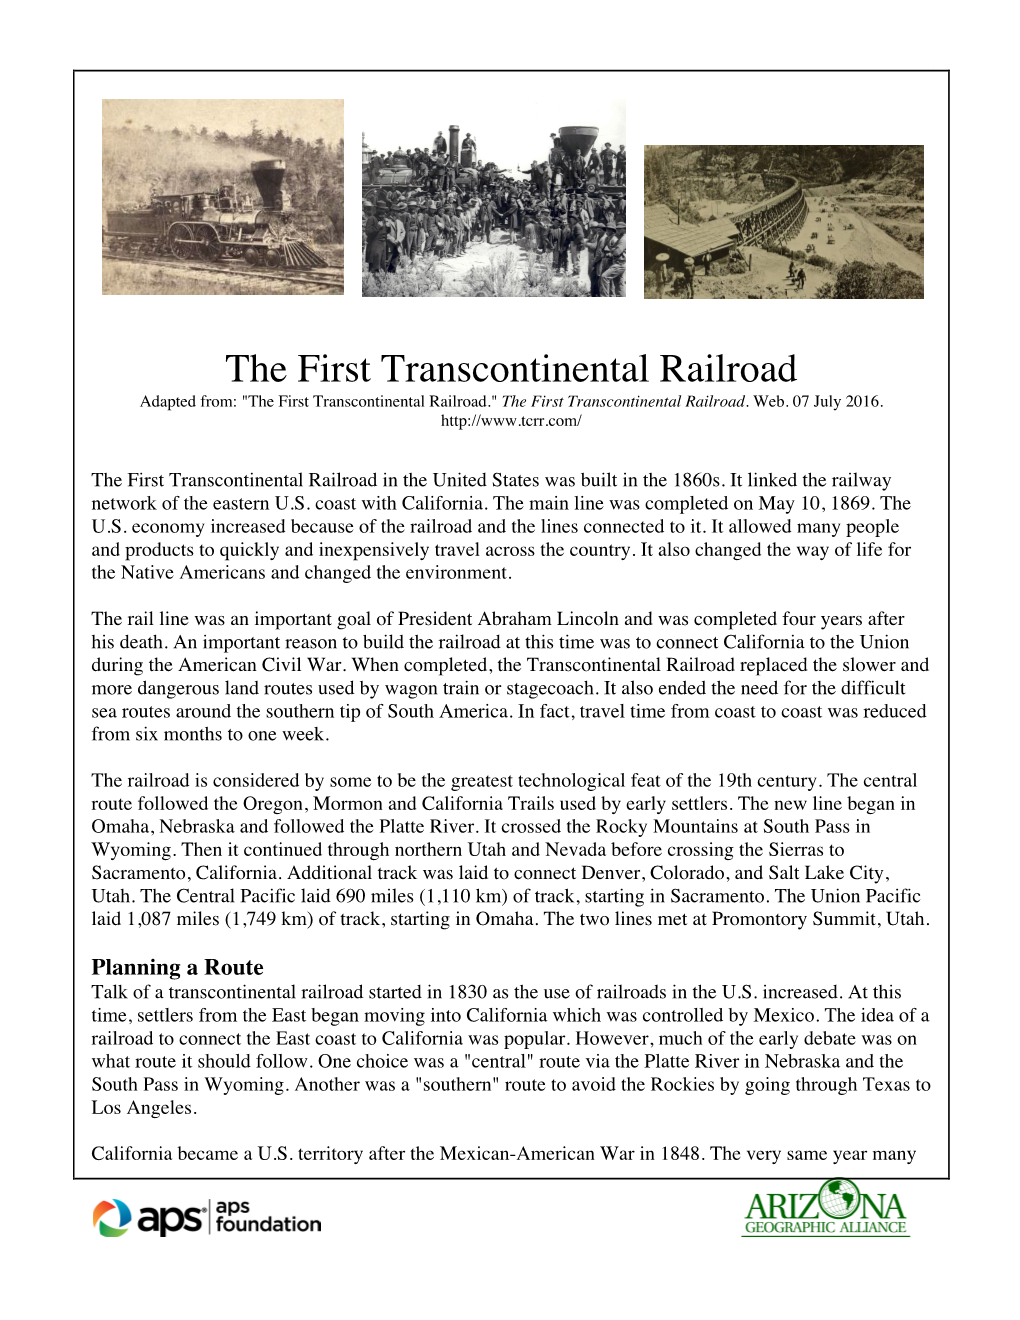 The First Transcontinental Railroad Adapted From: "The First Transcontinental Railroad." the First Transcontinental Railroad